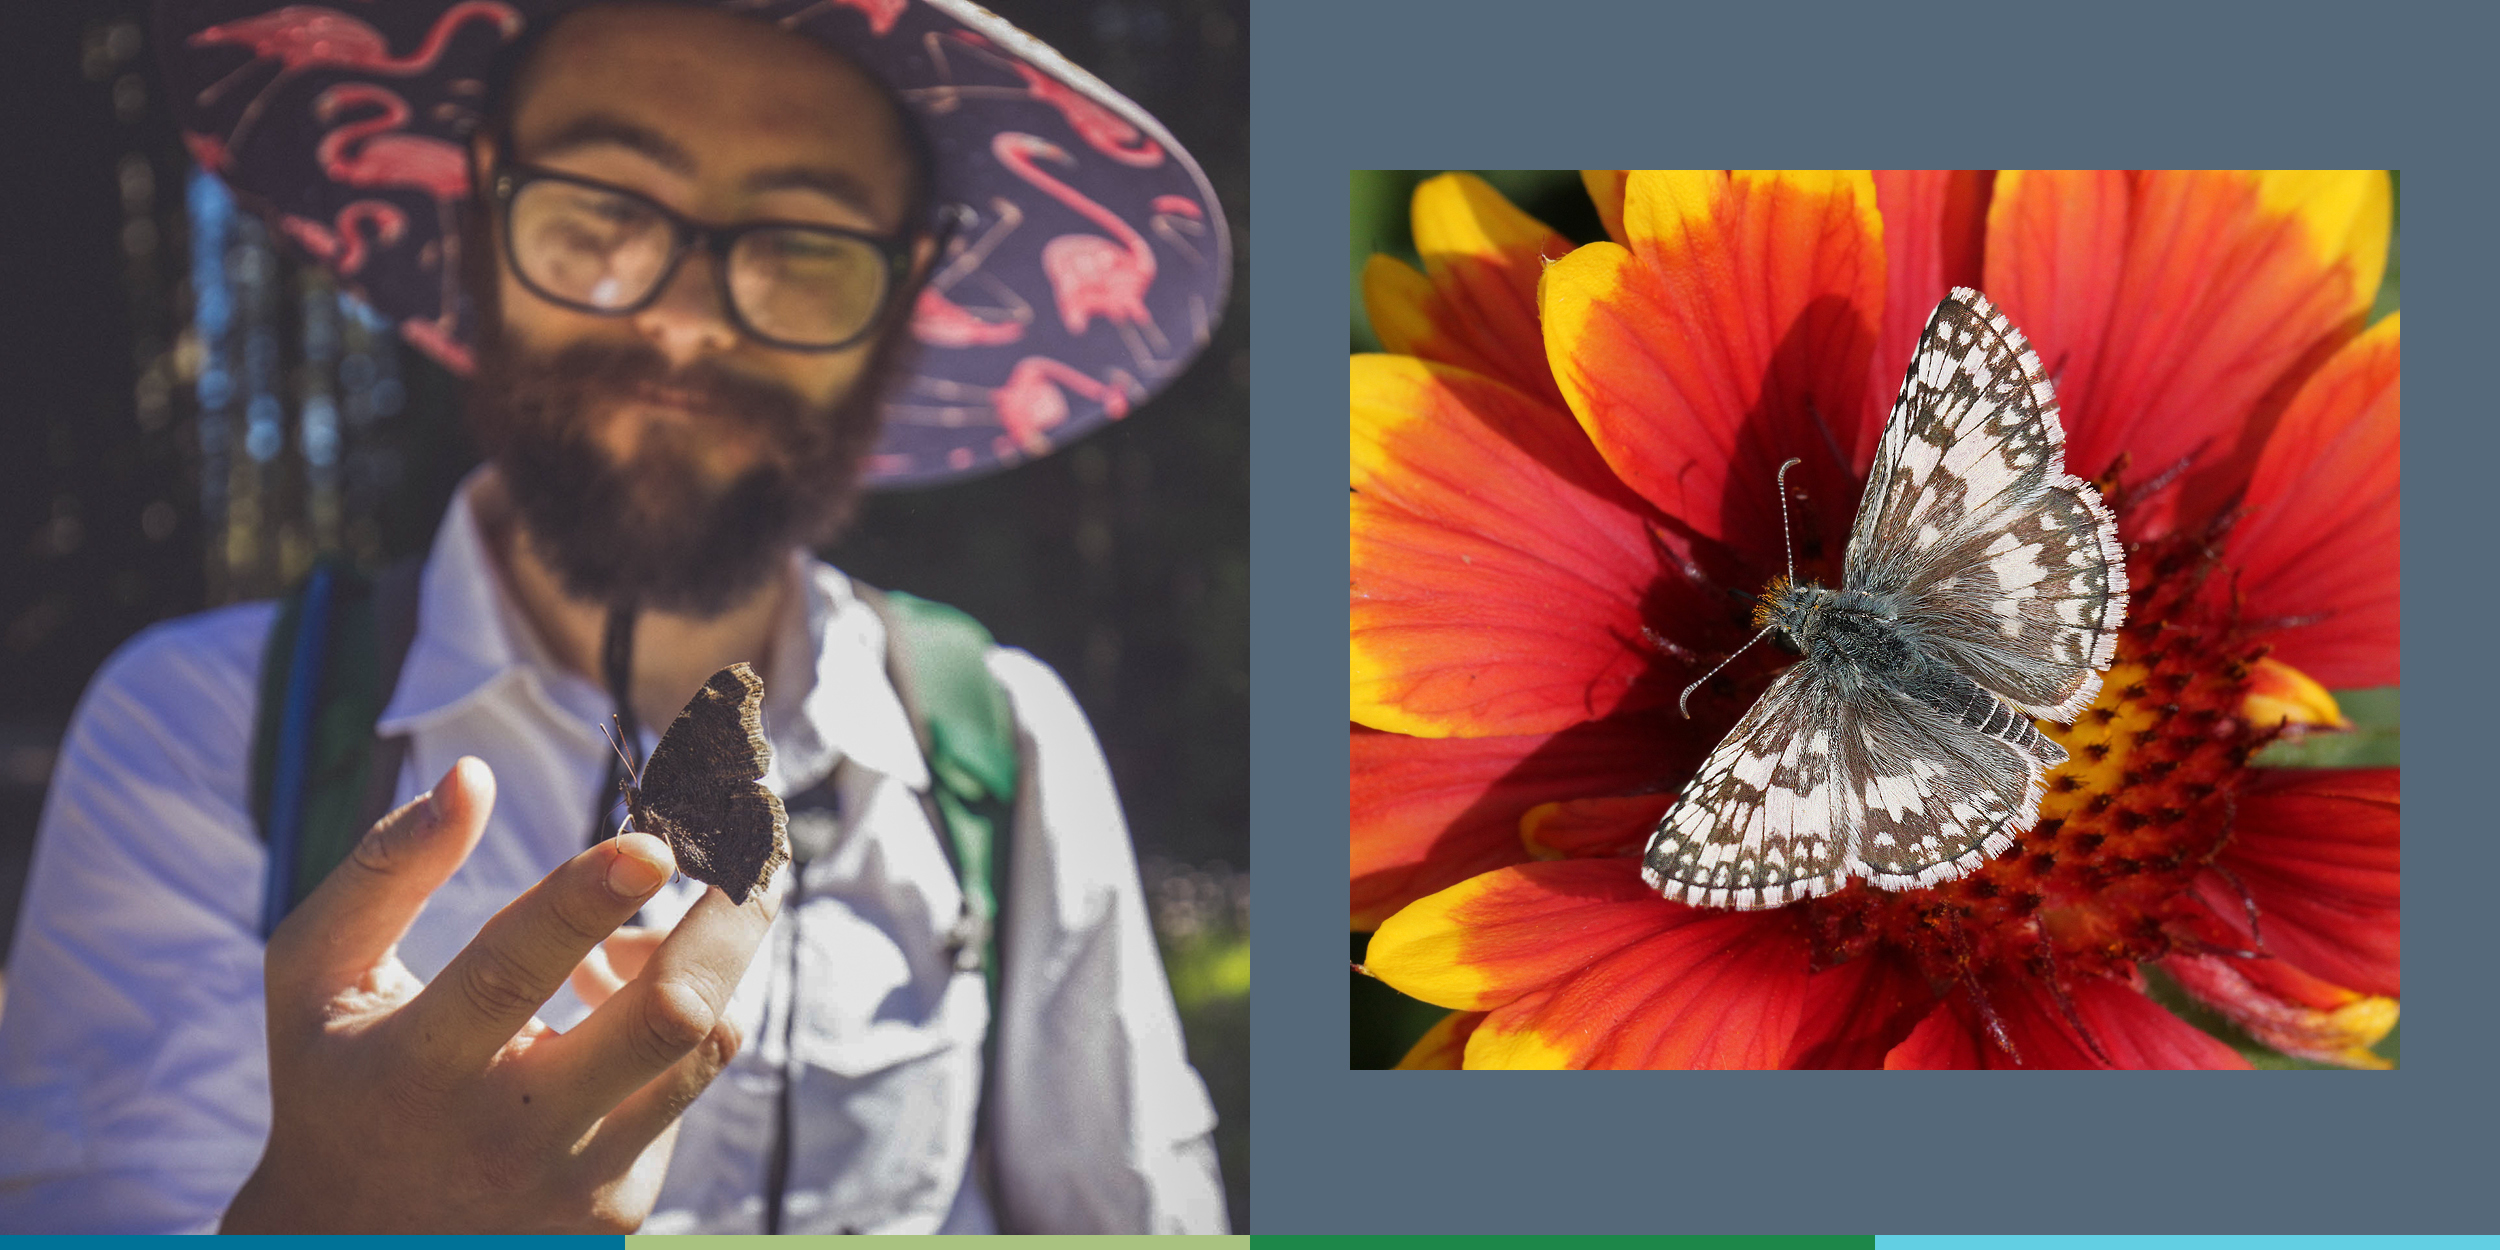 This composite image shows, on the left, a young bearded man admiring a butterfly sitting on his fingers and, on the right, a small brown and white butterfly resting in the center of a red and yellow flower